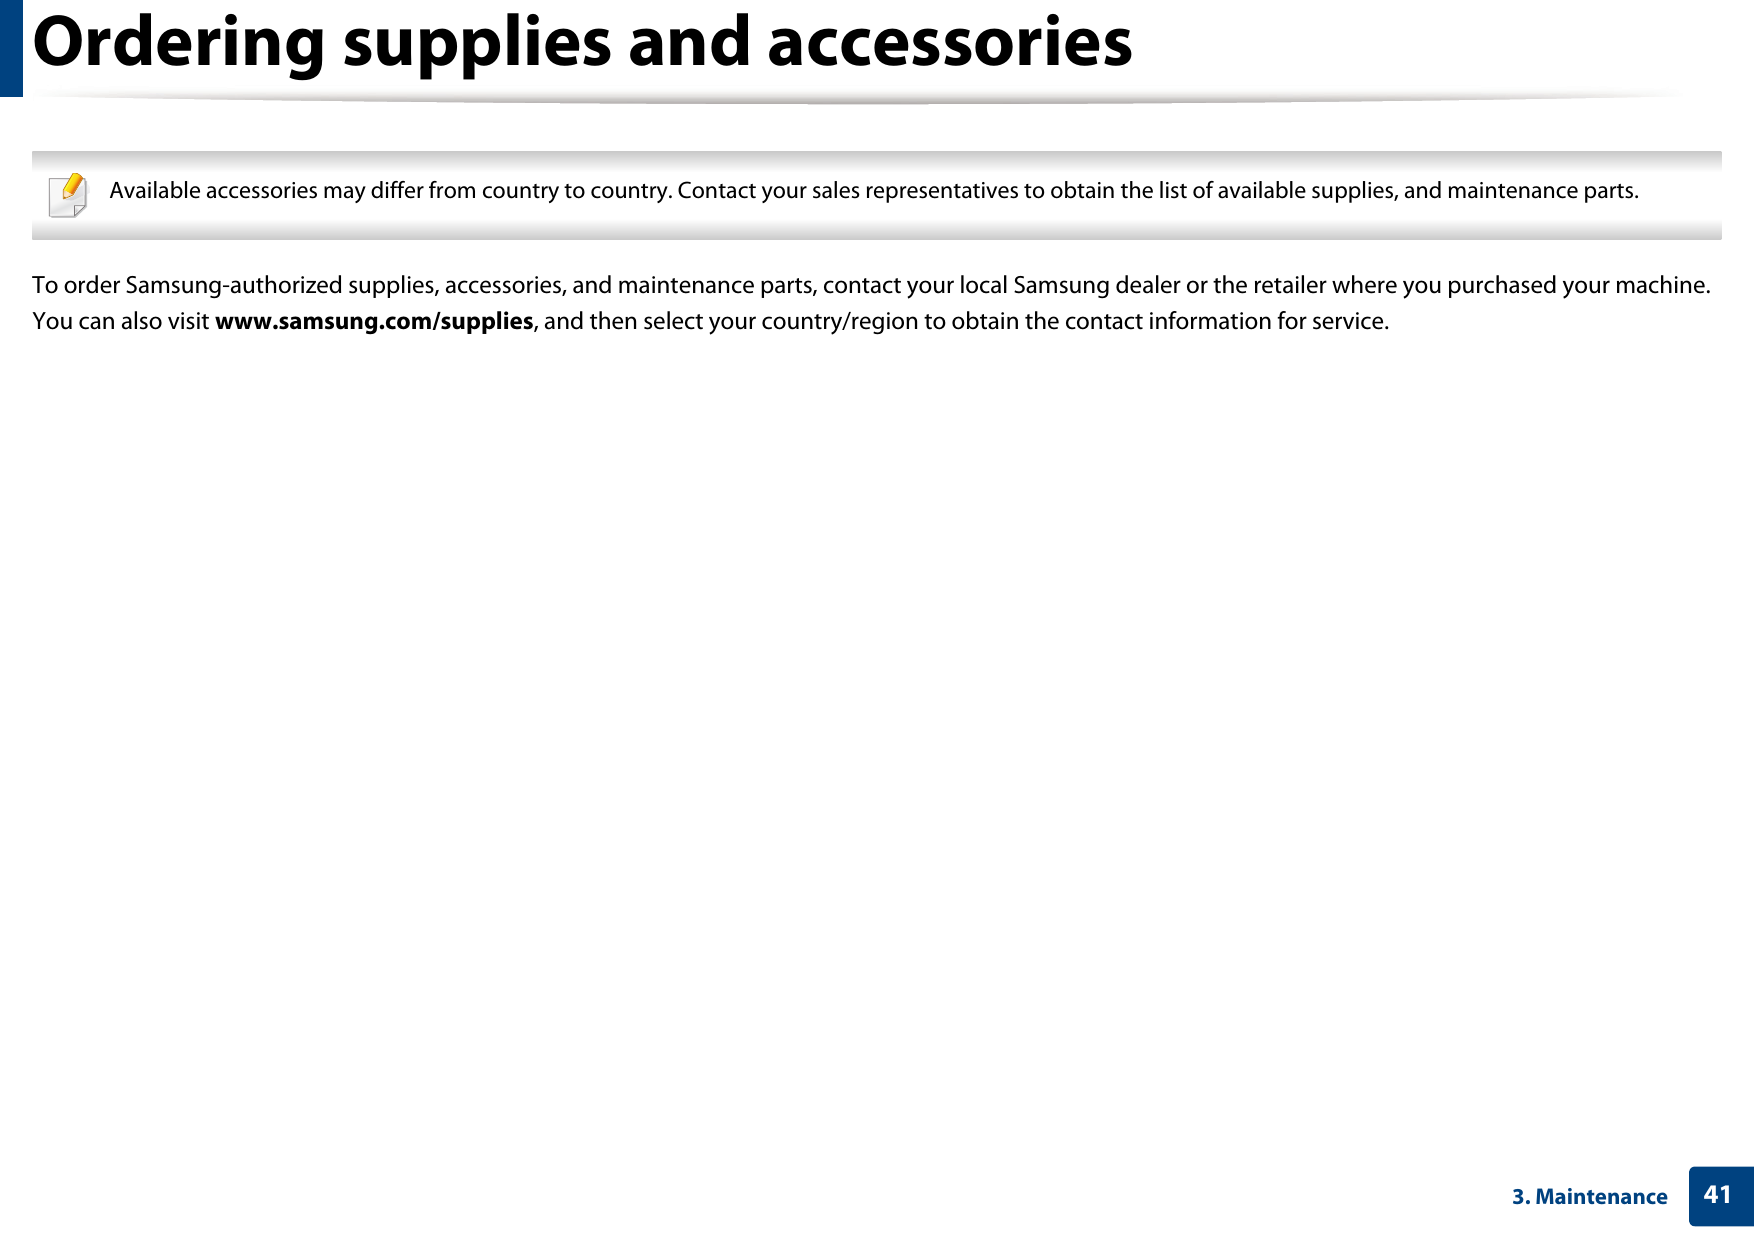 413. MaintenanceOrdering supplies and accessories Available accessories may differ from country to country. Contact your sales representatives to obtain the list of available supplies, and maintenance parts. To order Samsung-authorized supplies, accessories, and maintenance parts, contact your local Samsung dealer or the retailer where you purchased your machine. You can also visit www.samsung.com/supplies, and then select your country/region to obtain the contact information for service.